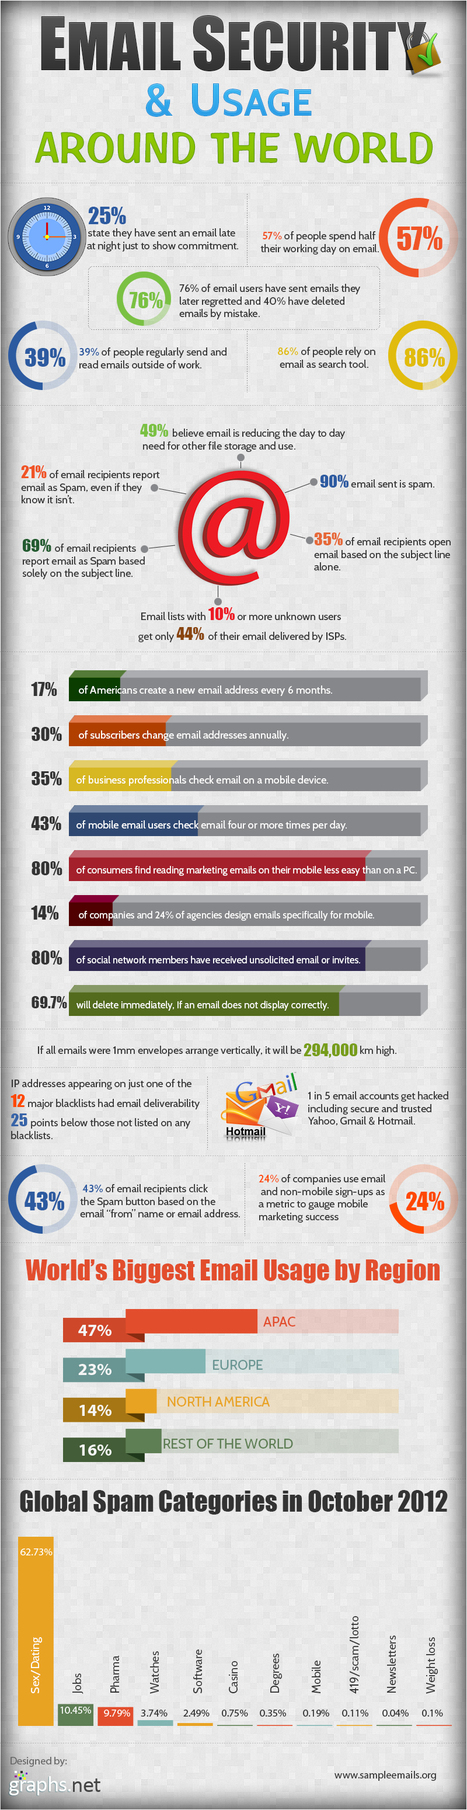 INFOGRAPHIC: Email Security & Usage Around the World | Information Technology & Social Media News | Scoop.it